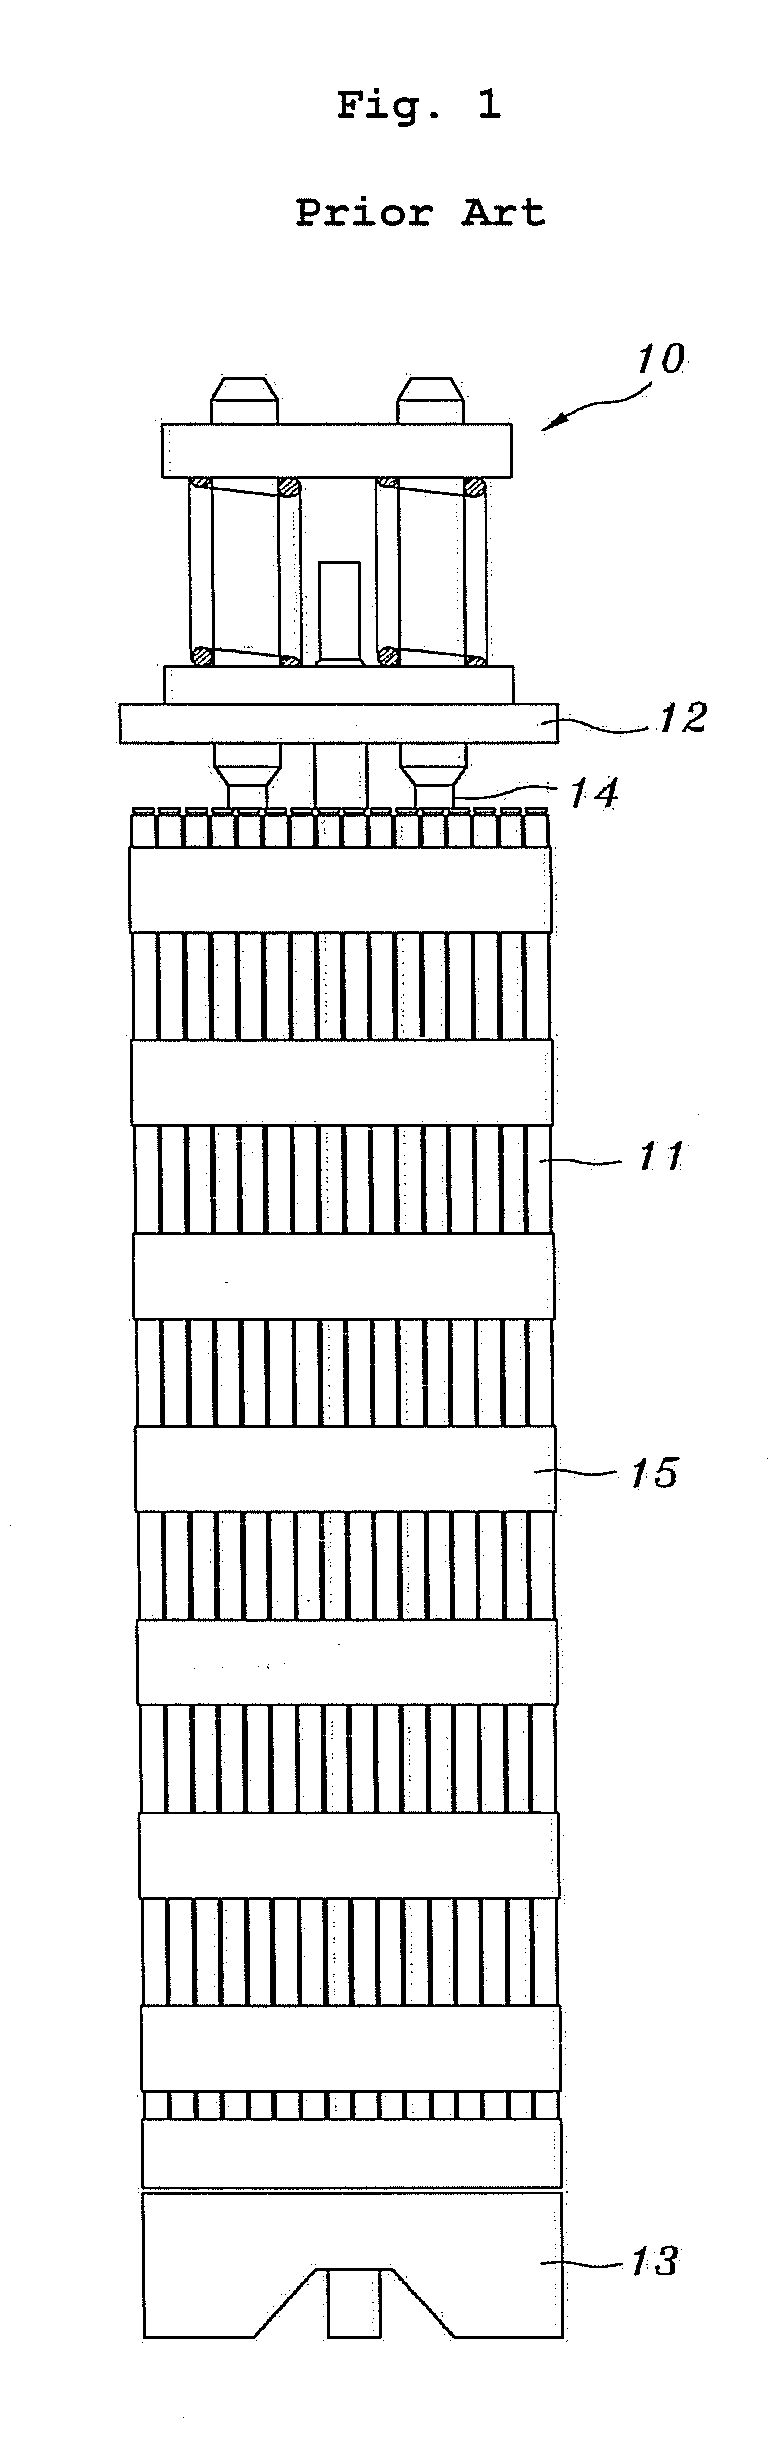 Dual-cooled fuel rod's spacer grids with upper and lower cross-wavy-shape dimple